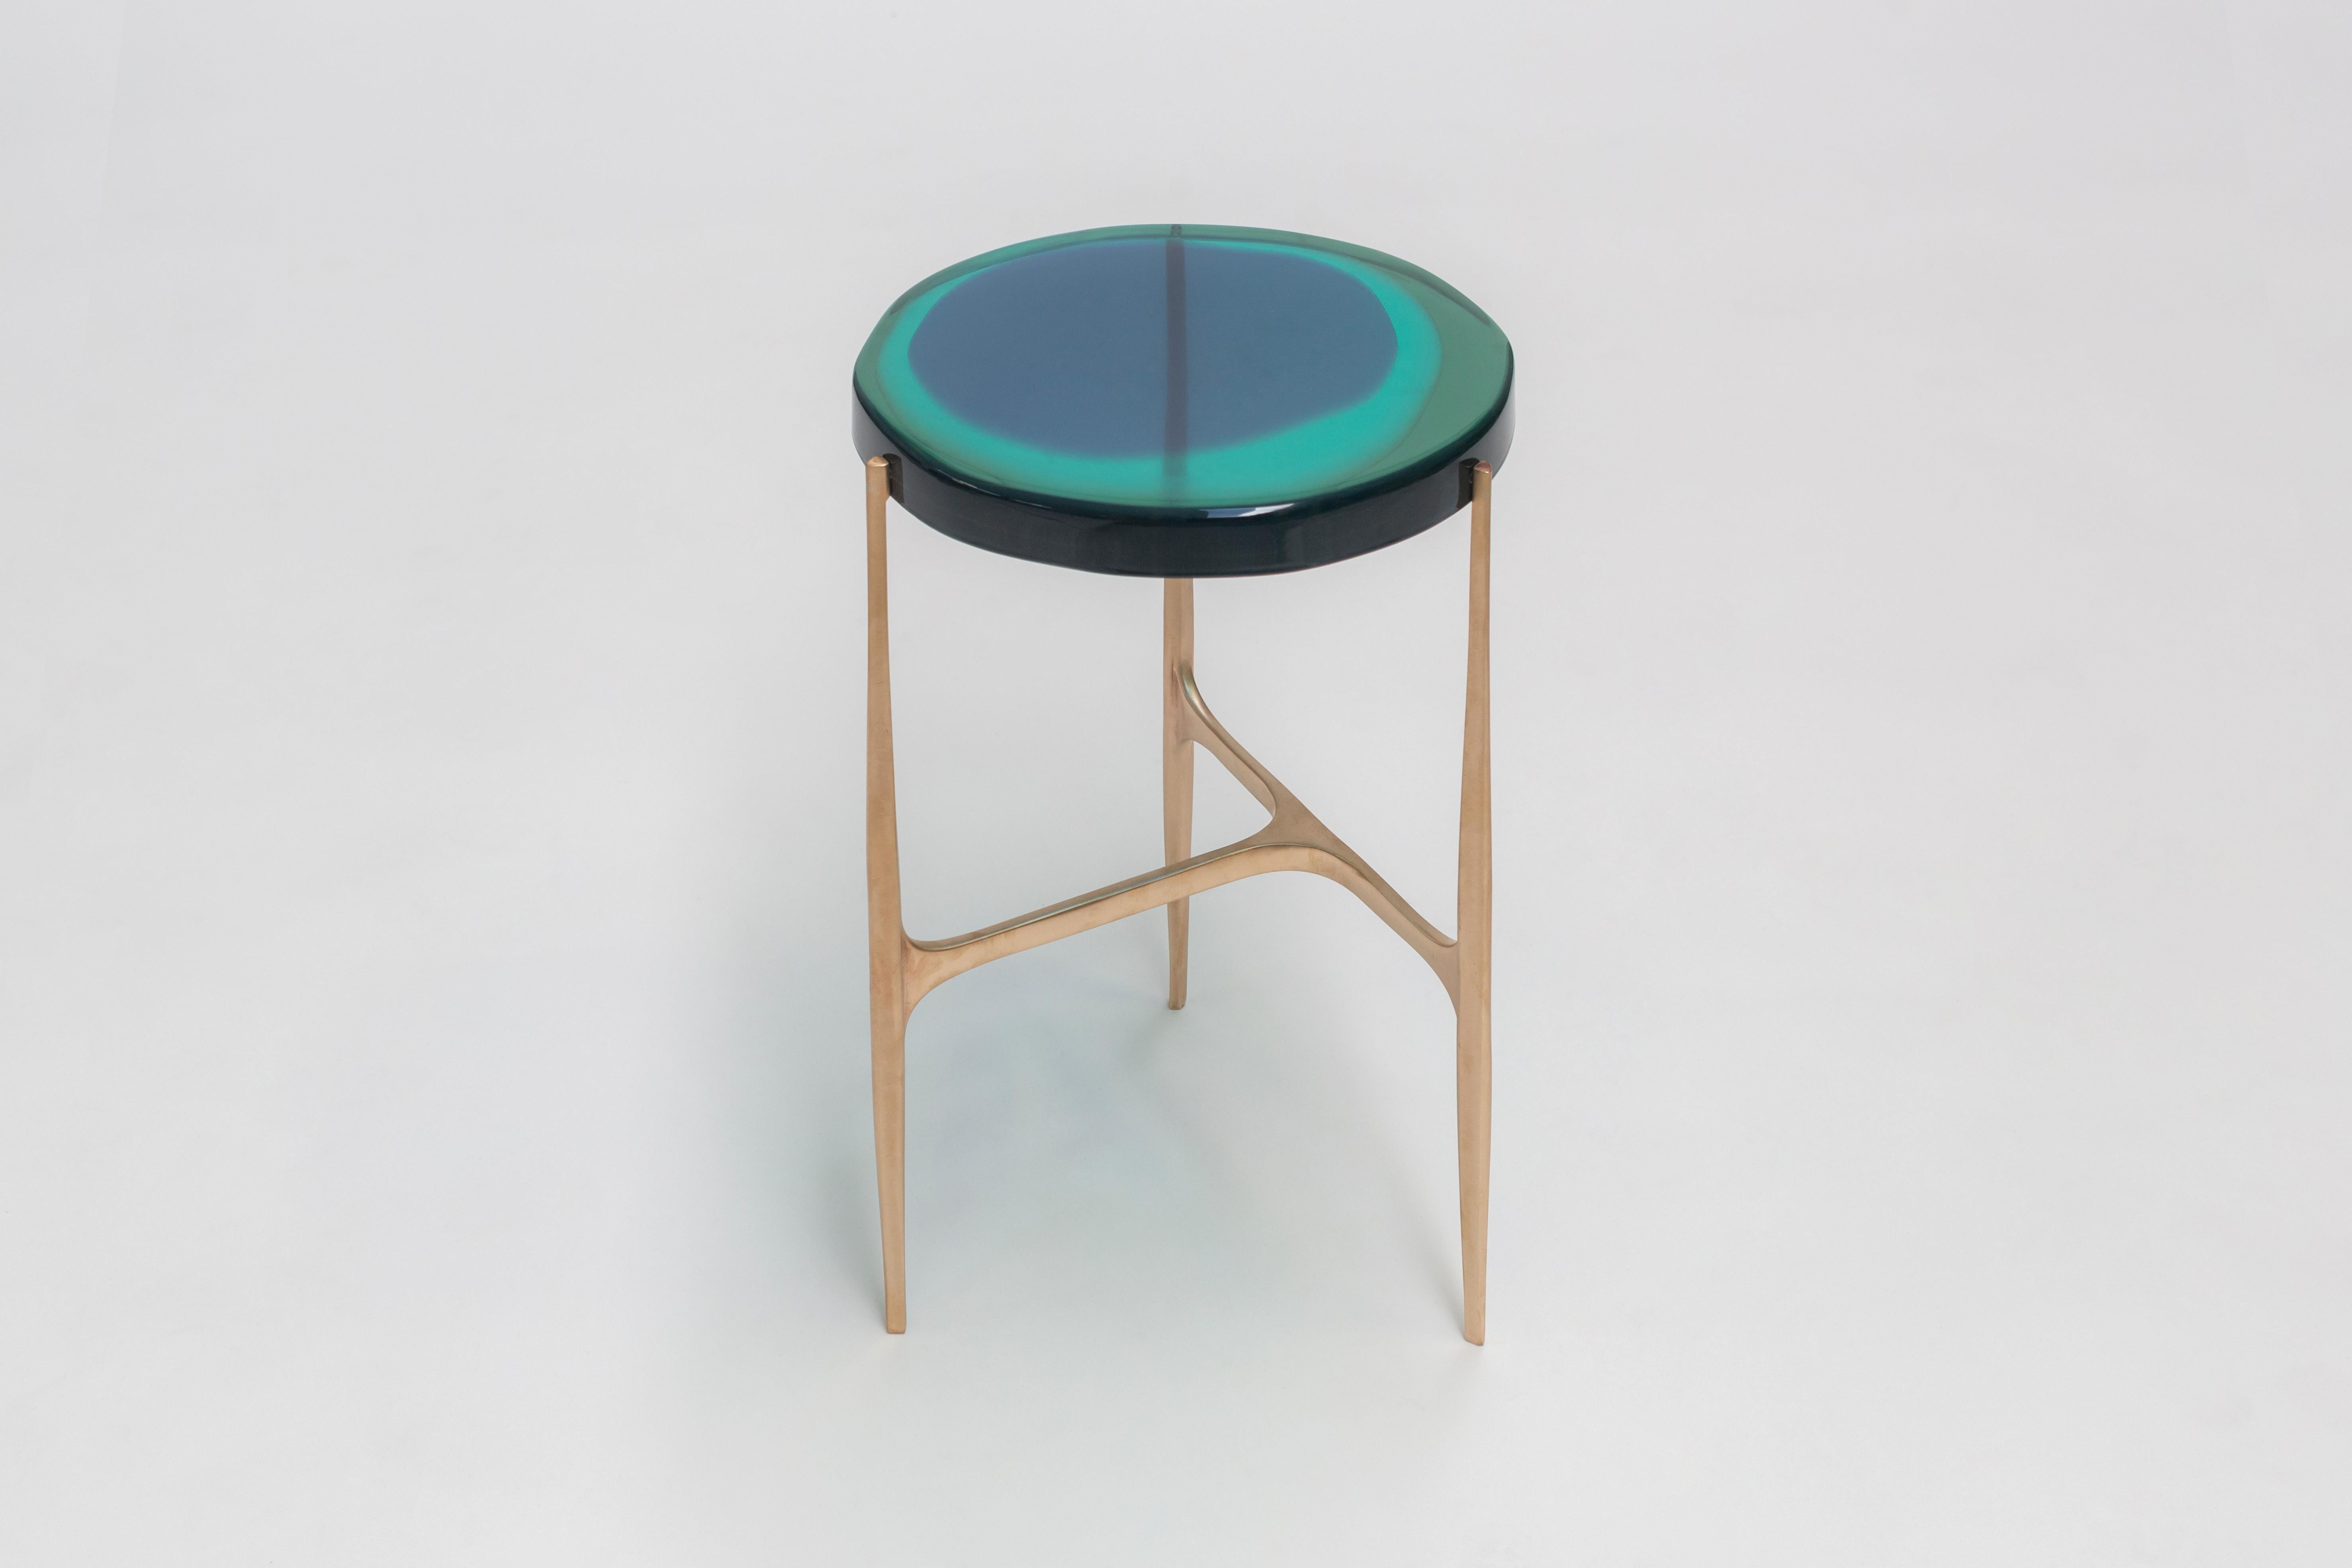 Agatha coffee table by Draga & Aurel
Dimensions: W 34 x D 34 x H 50
 top Ø 34 cm
Materials: Resin, bronze

The Agatha coffee tables are featured by irregular circular tops of transparent and
colorful resin sit on a bronze frame with a